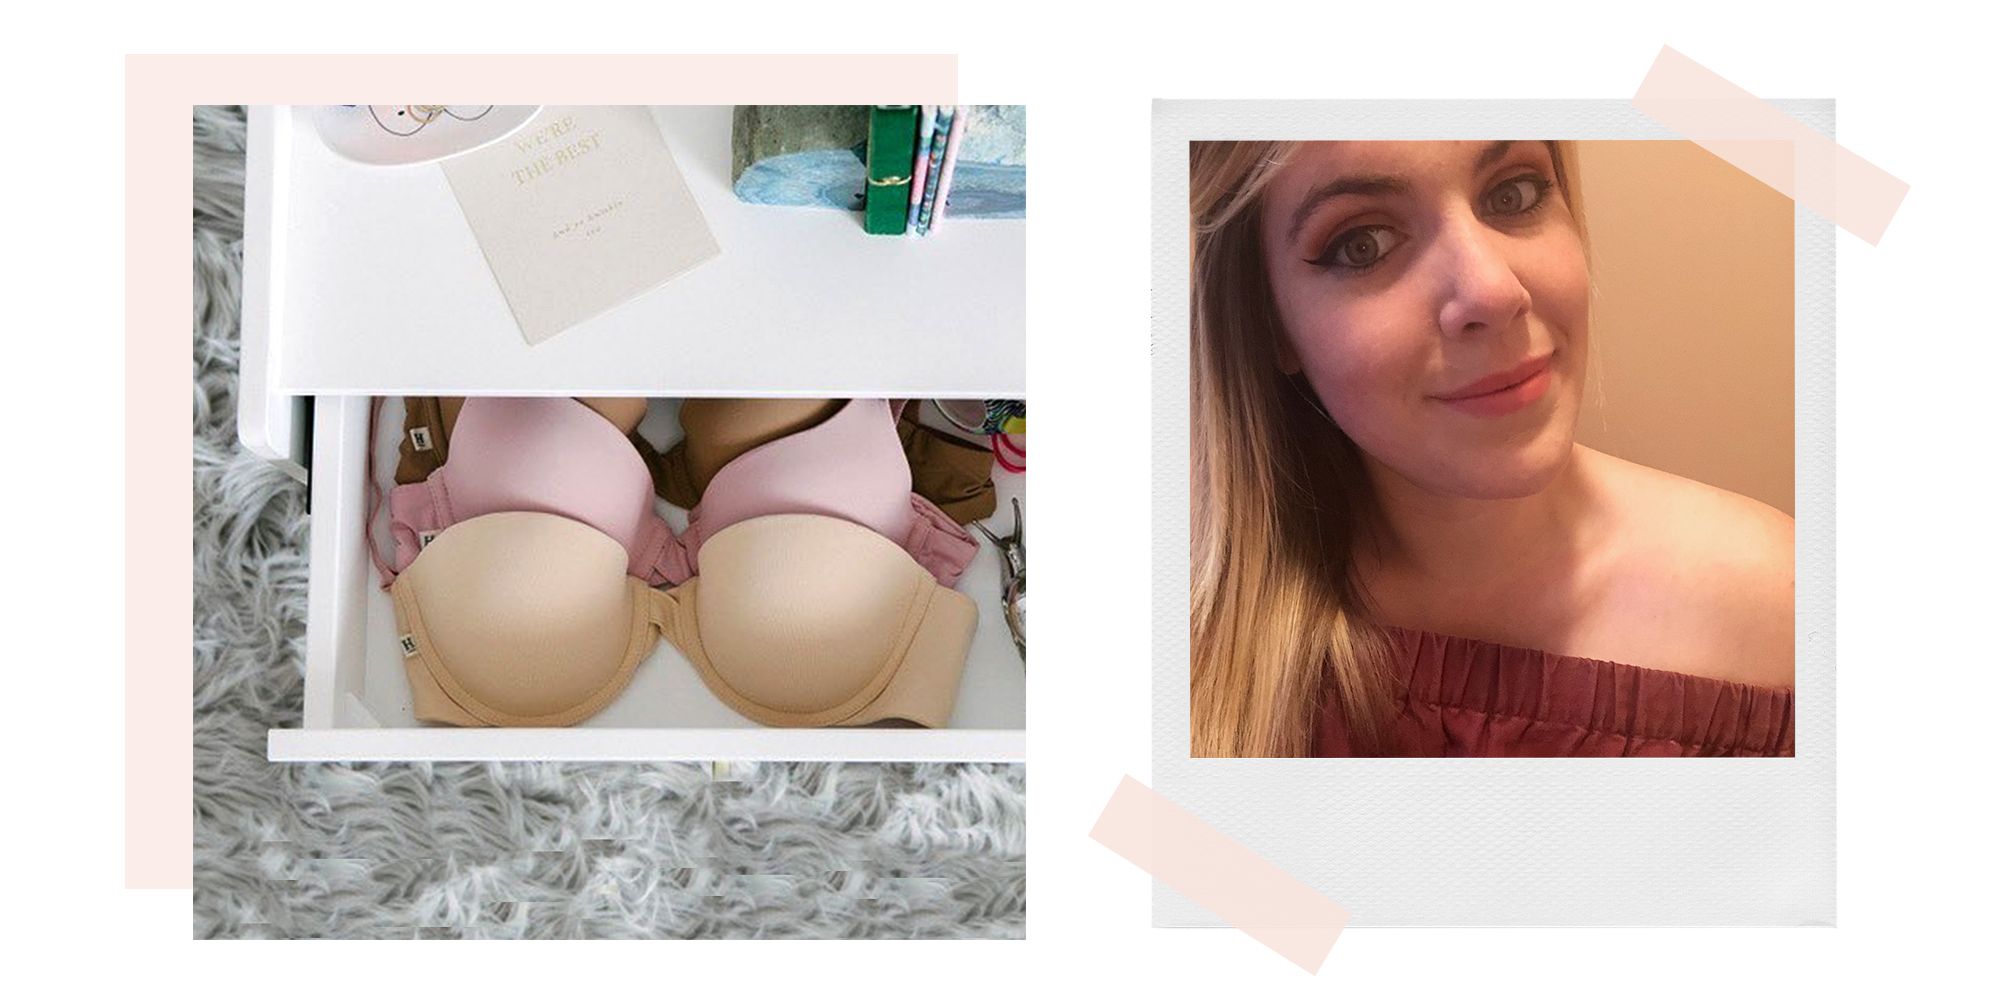 6,000 People Are Waiting To Buy This Strapless Bra